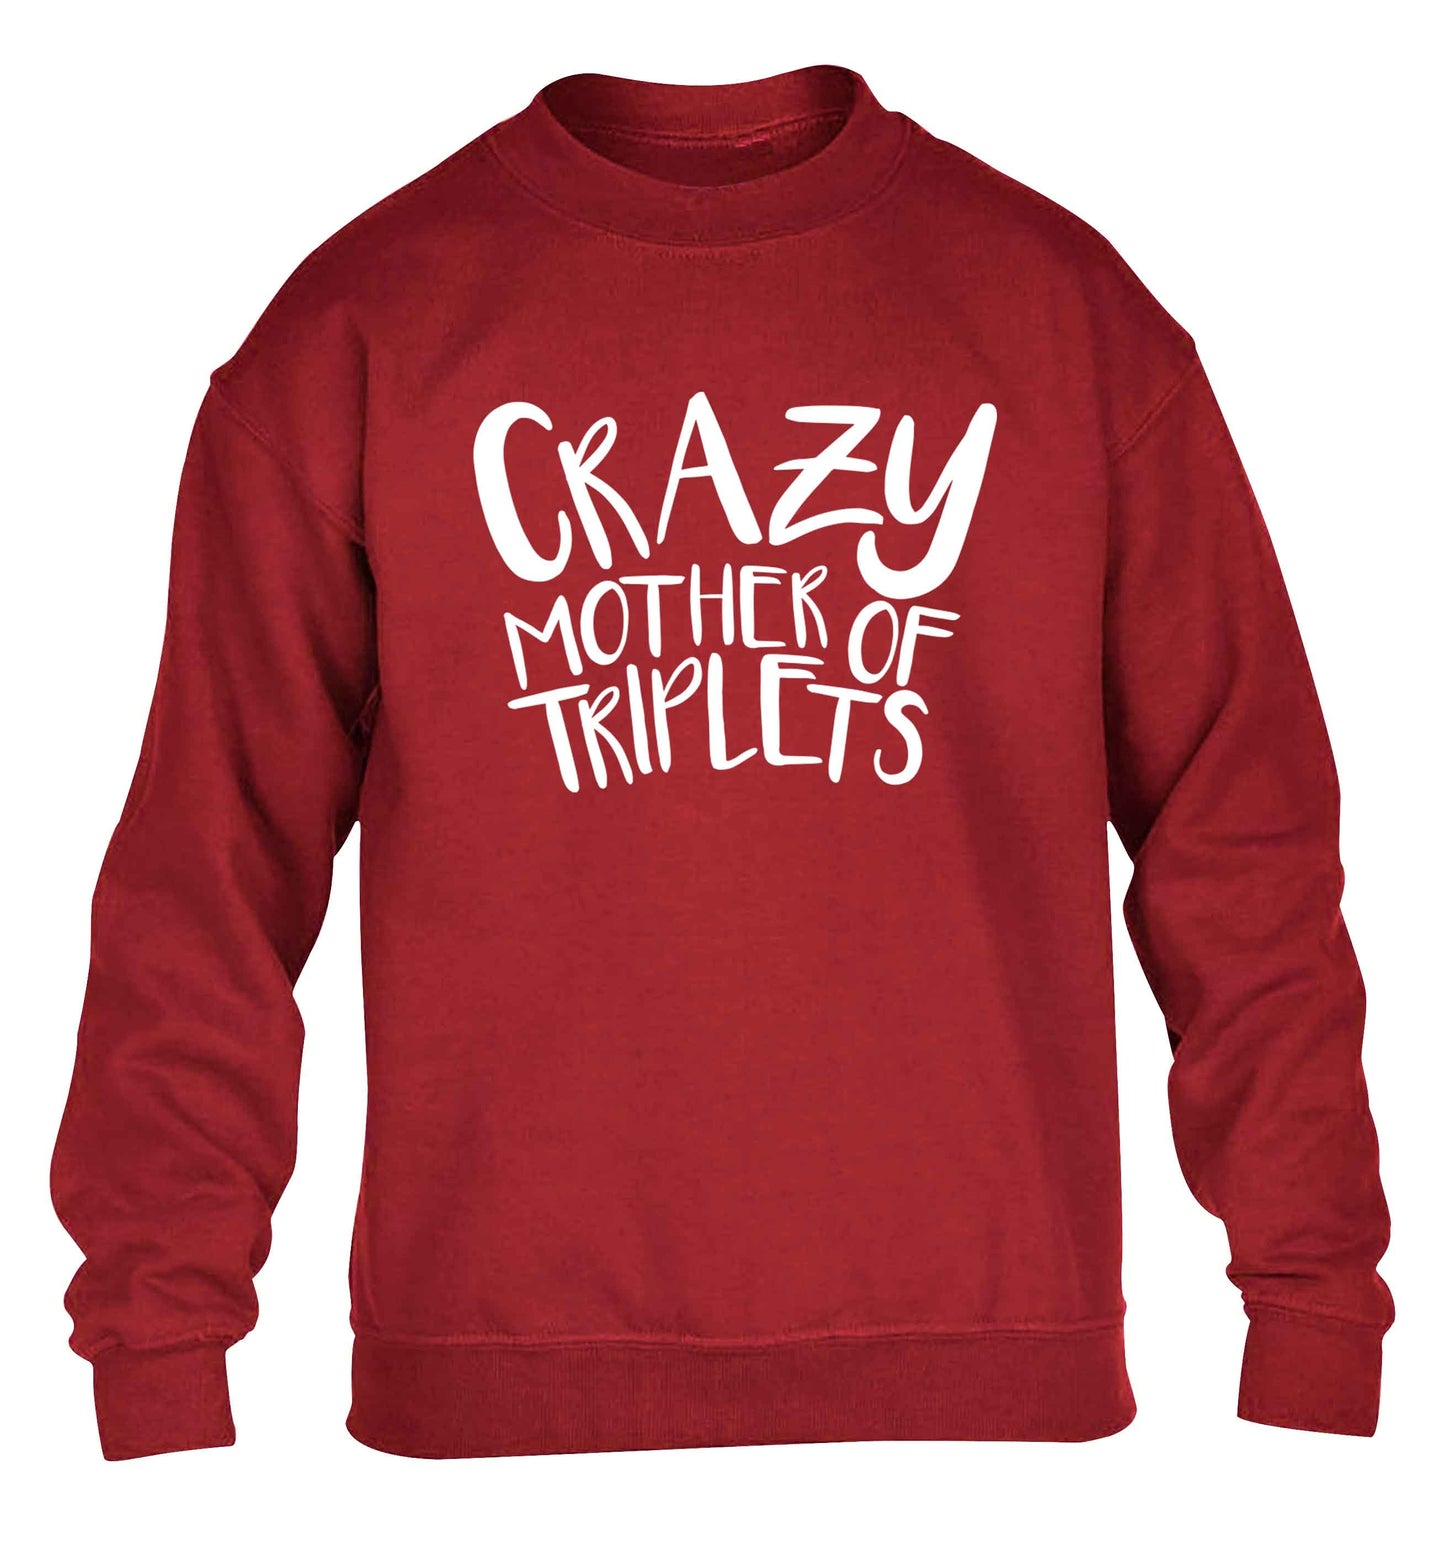 Crazy mother of triplets children's grey sweater 12-13 Years